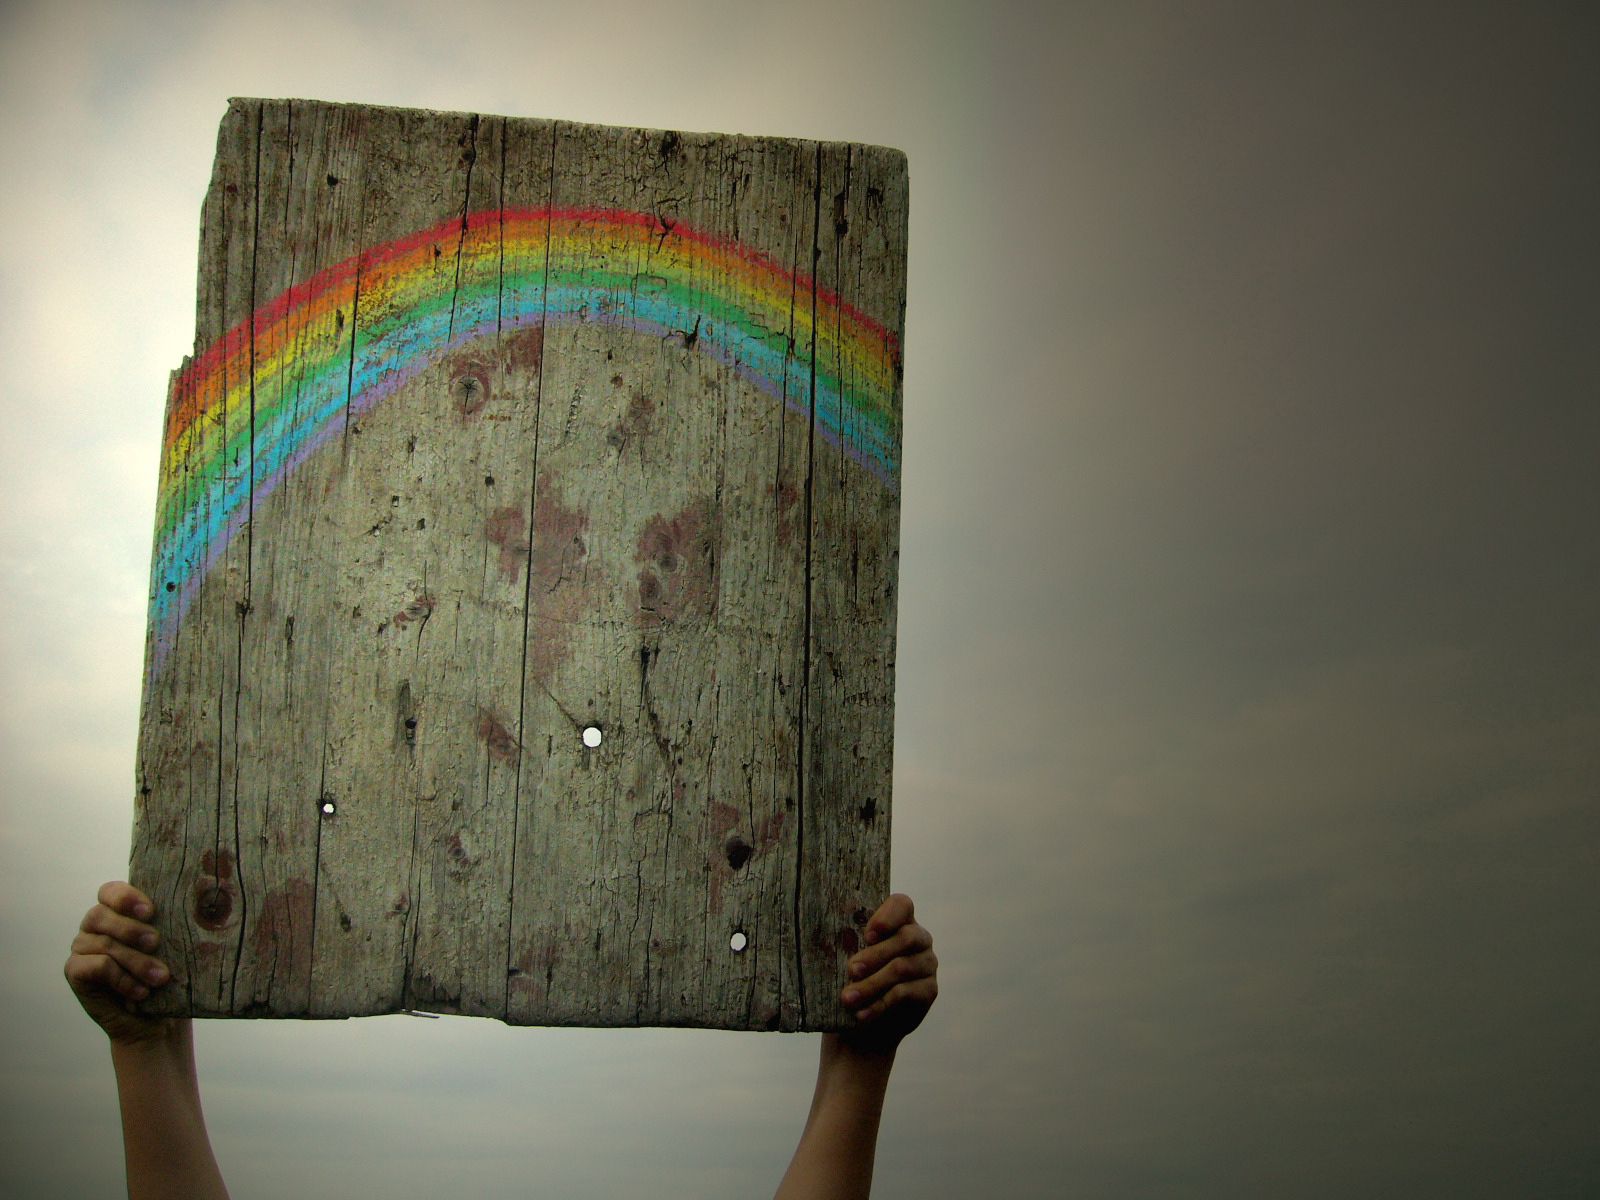 rainbow, miscellanea, miscellaneous, wood, wooden, picture, drawing, hands, nameplate, plate Full HD